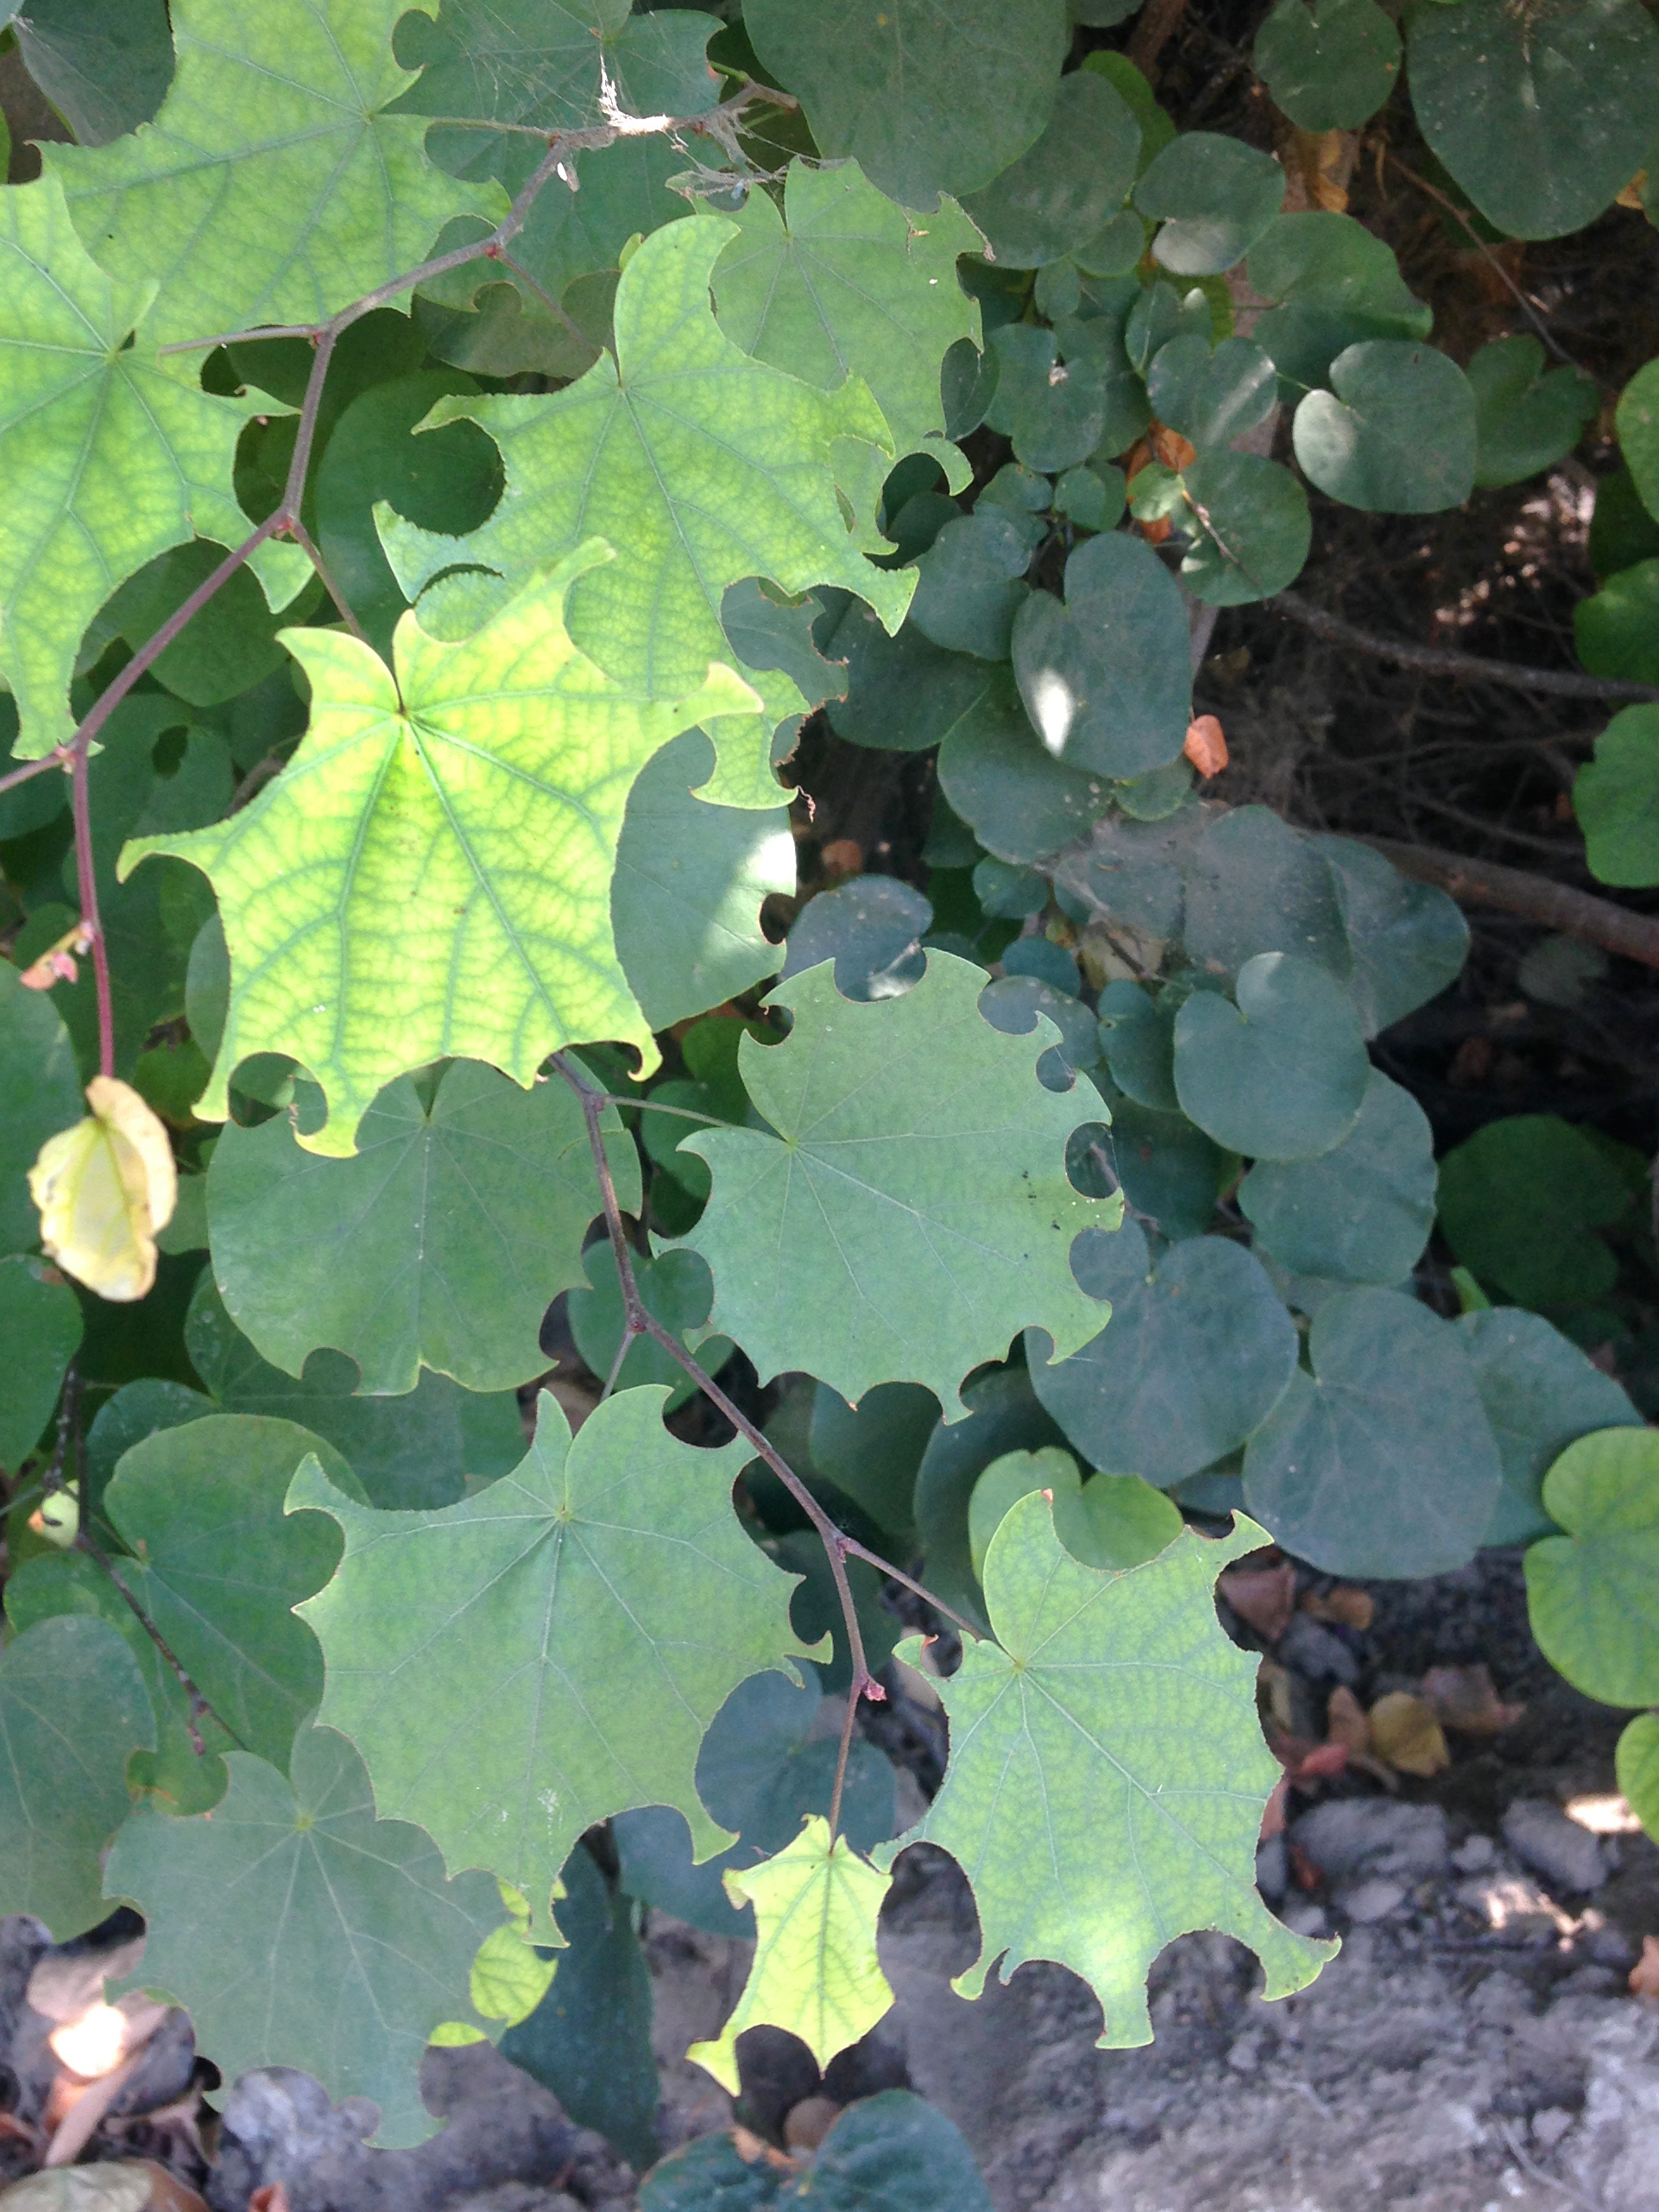 Round leaves have circular cutouts removed from the edges at regular intervals.